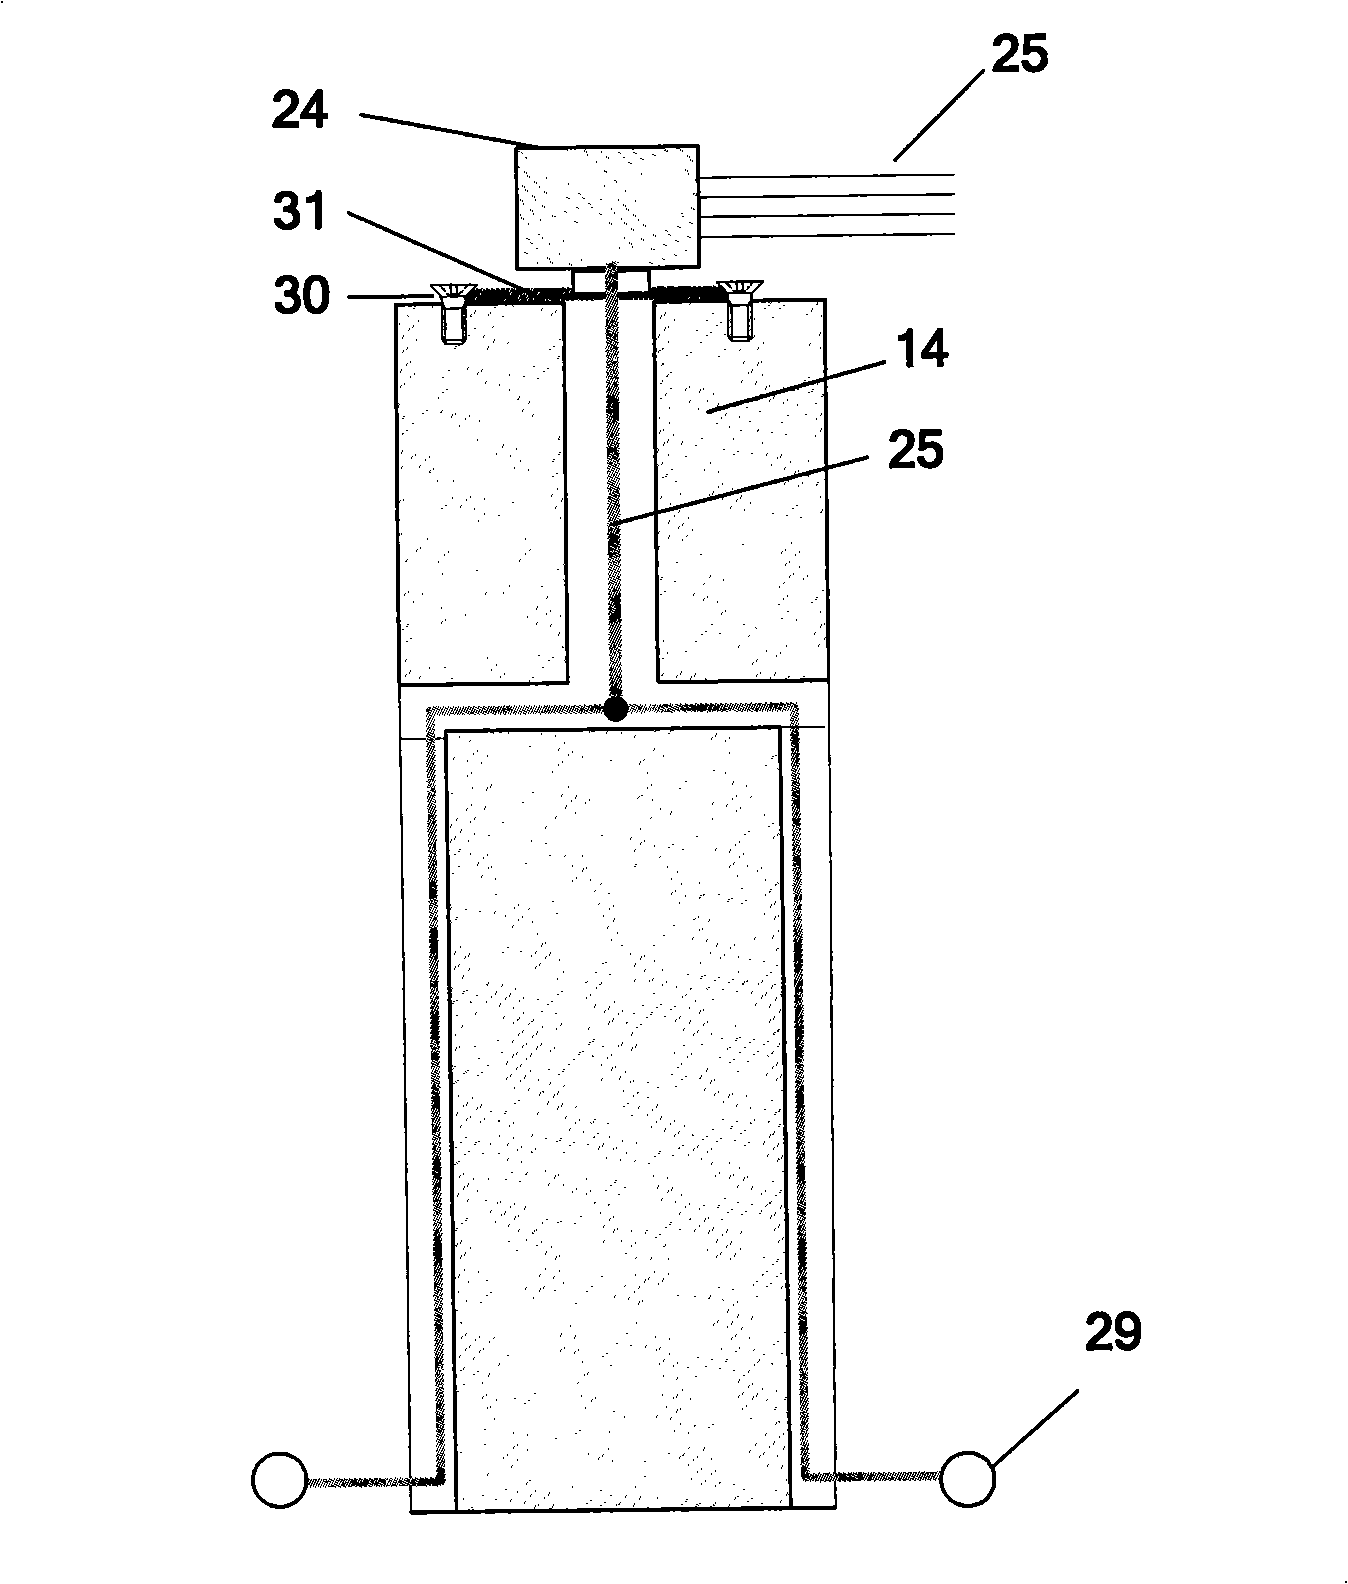 Device and method for hypergravity electrochemical reaction